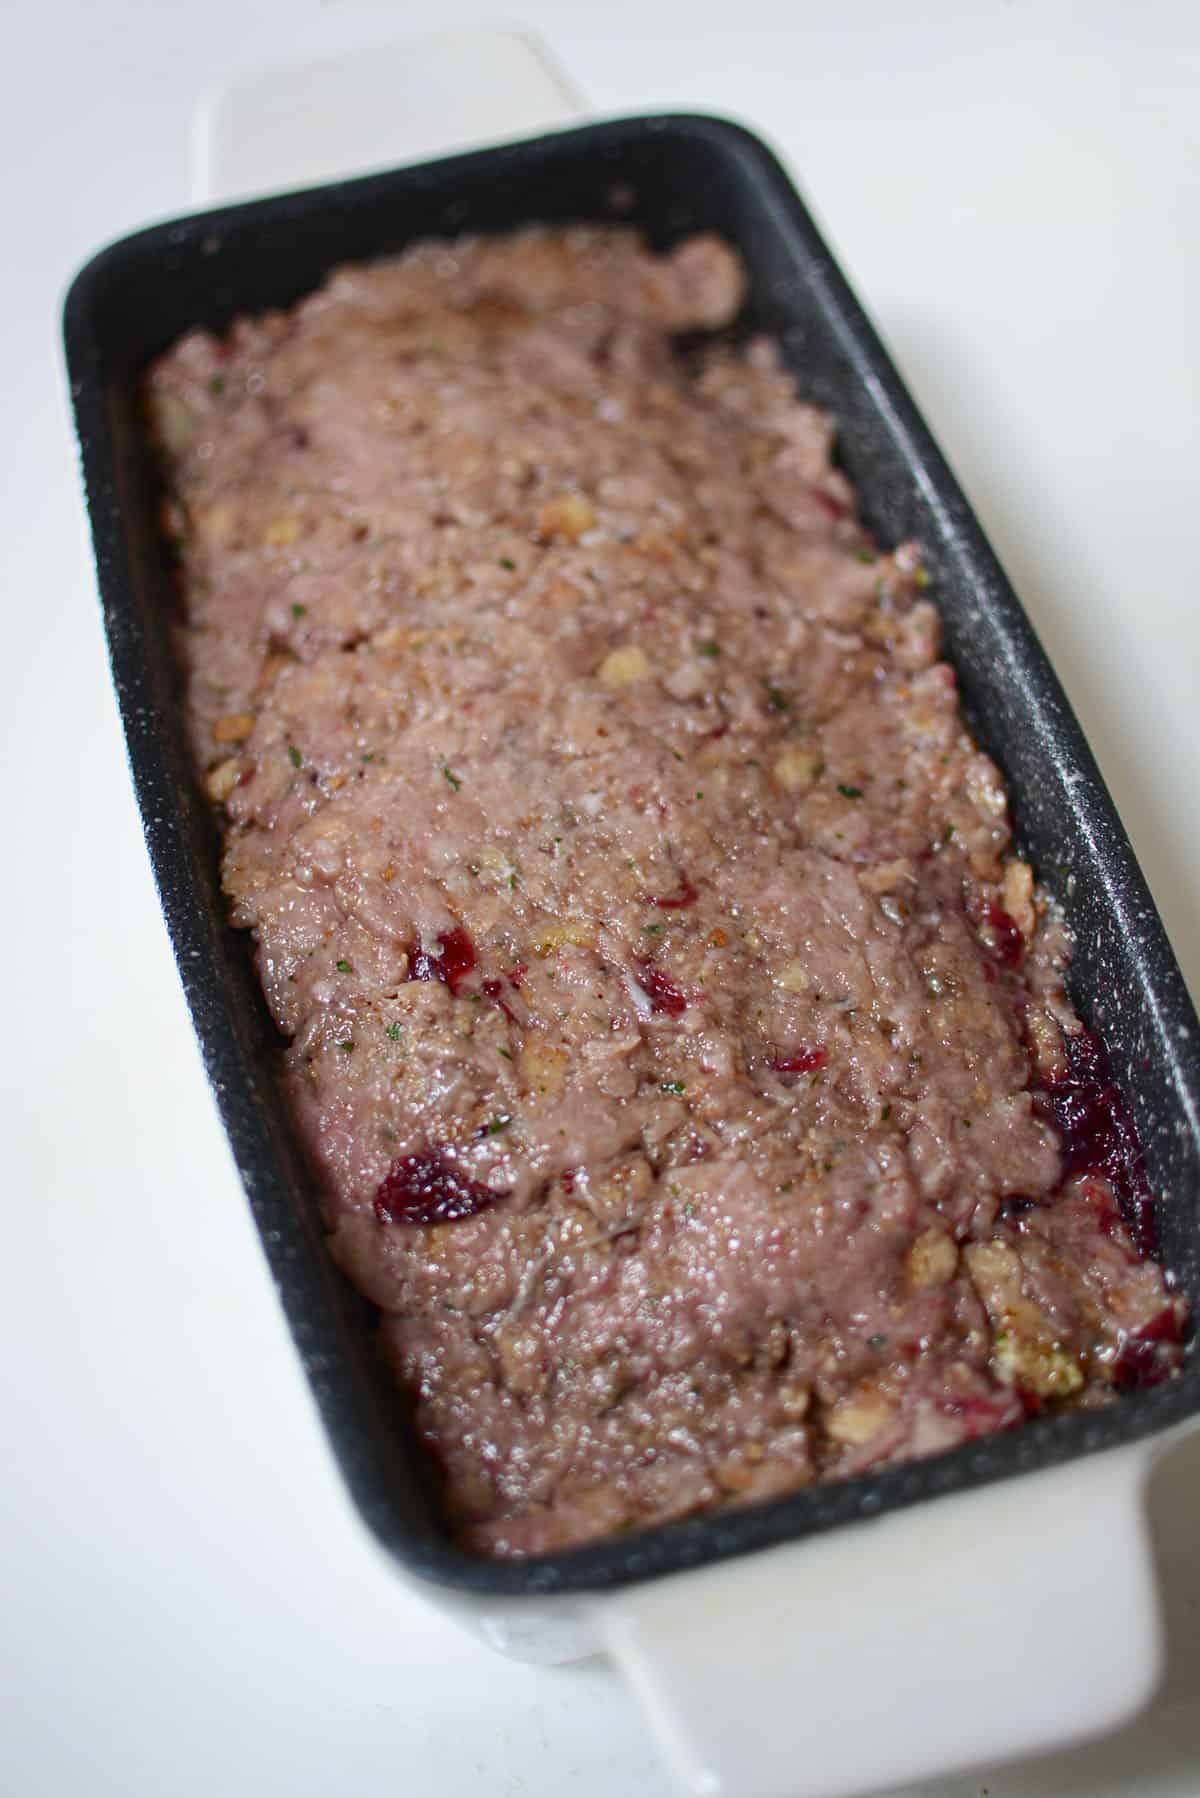 The raw turkey meatloaf in a loaf pan, ready to go into the oven.